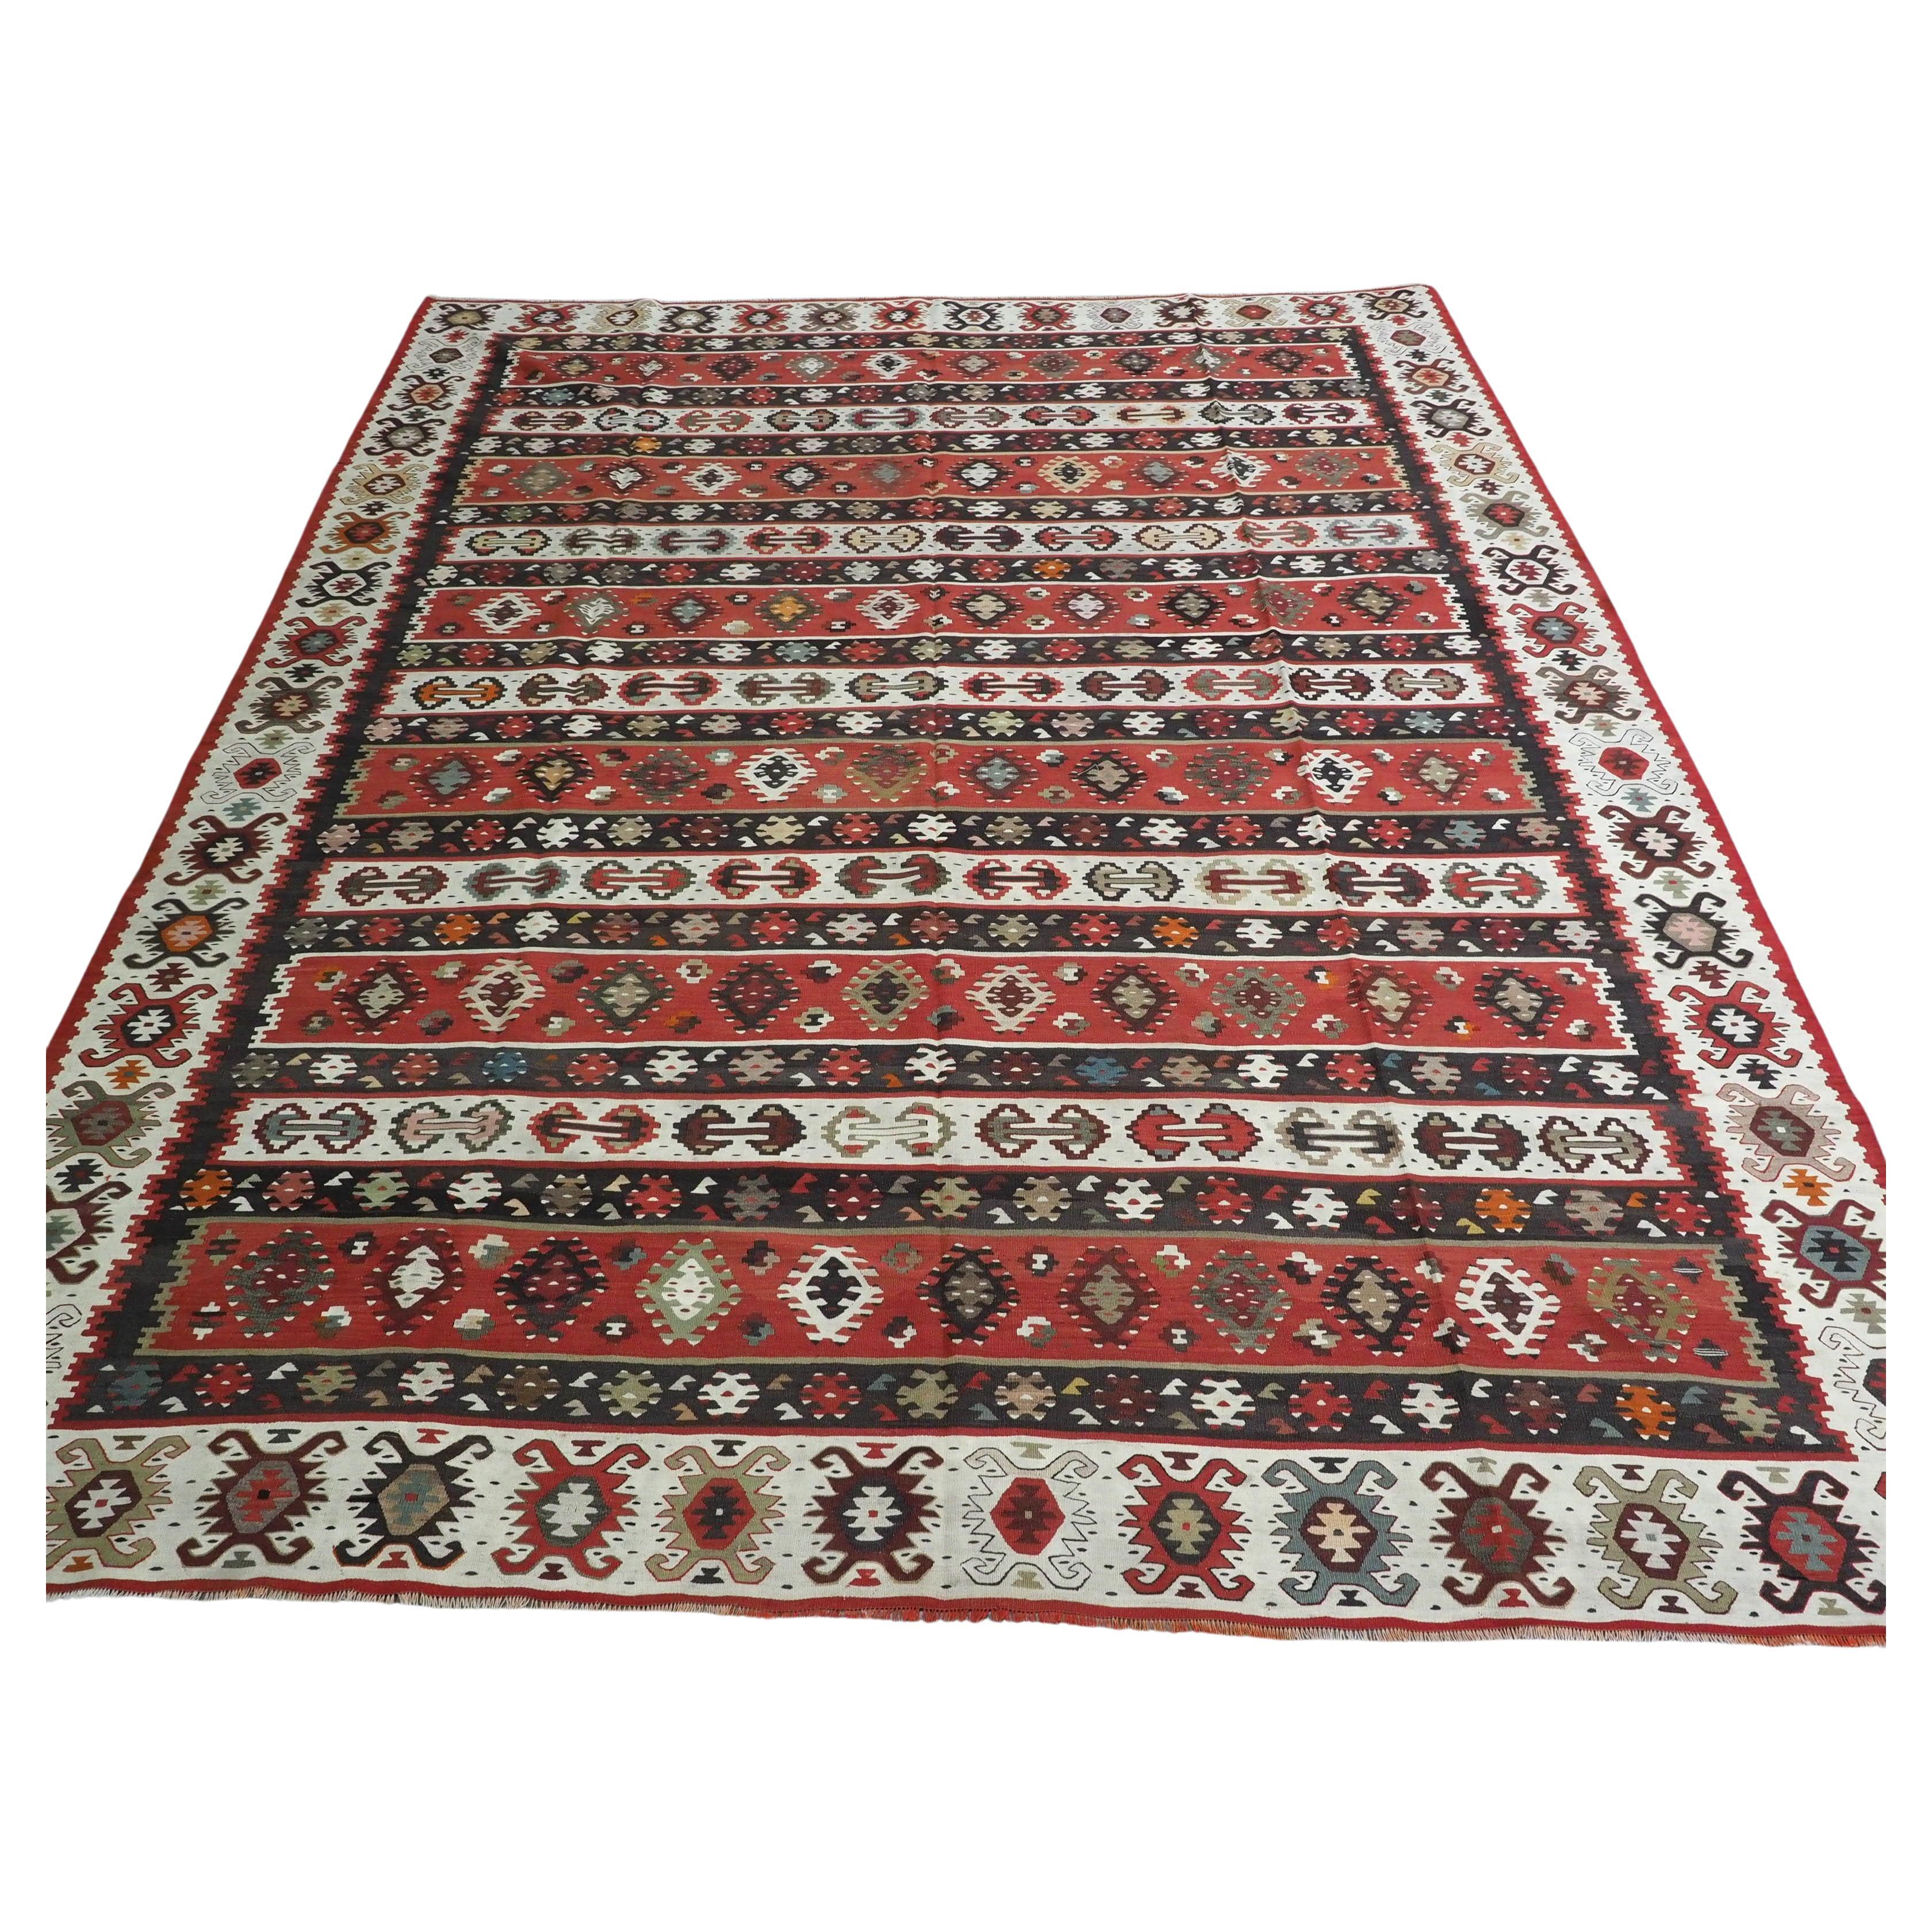 Antique Pirot / Sarkoy kilim of traditional banded design, circa 1920. For Sale